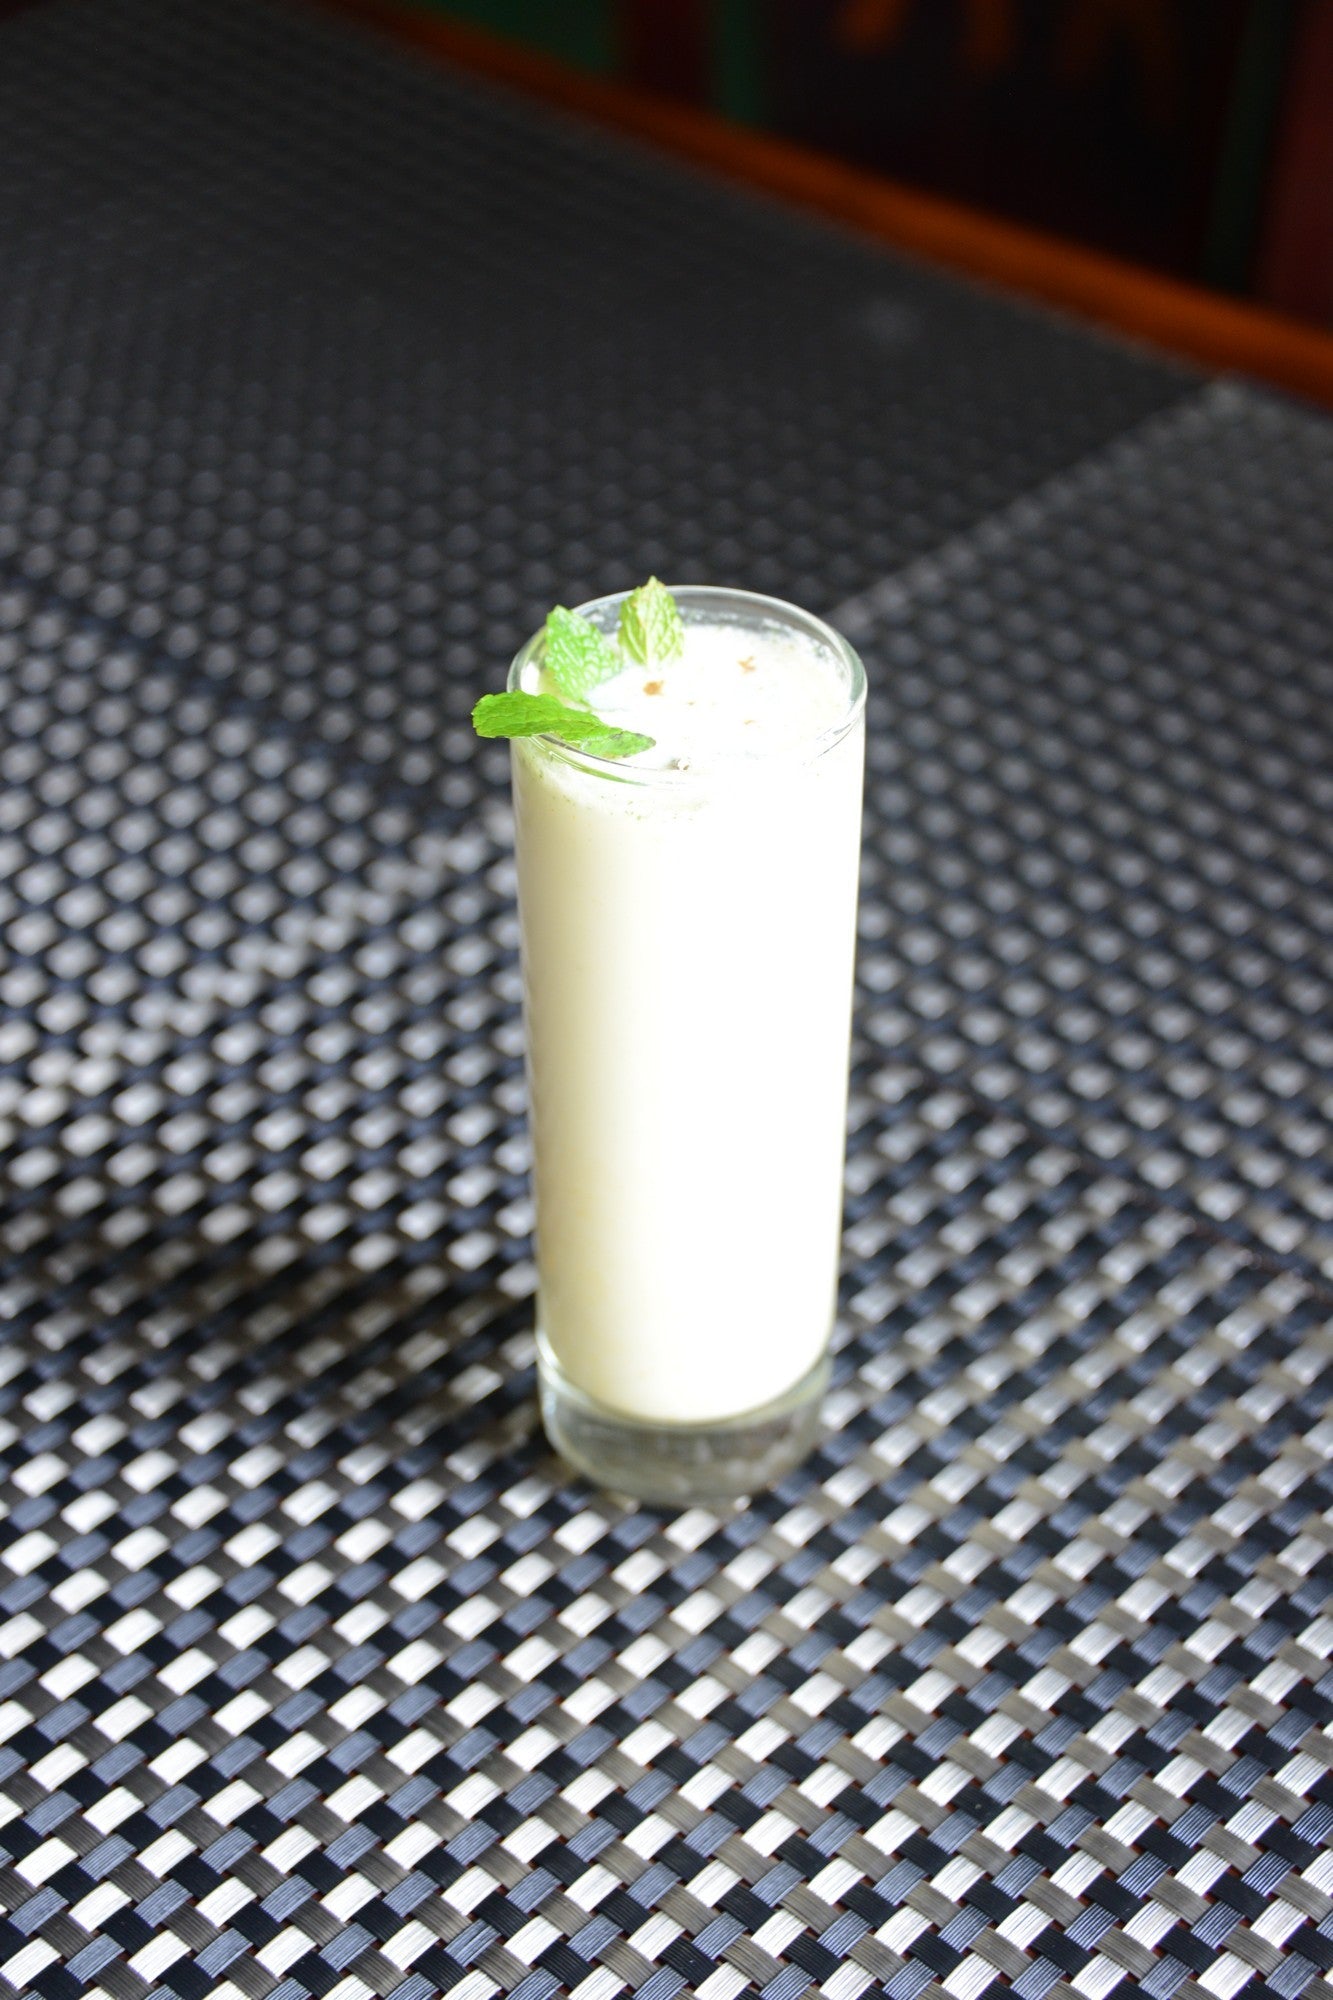 A refreshing glass of Masala Chaas, a traditional Indian yogurt drink made with homemade yogurt, coriander, ginger, and Indian spices